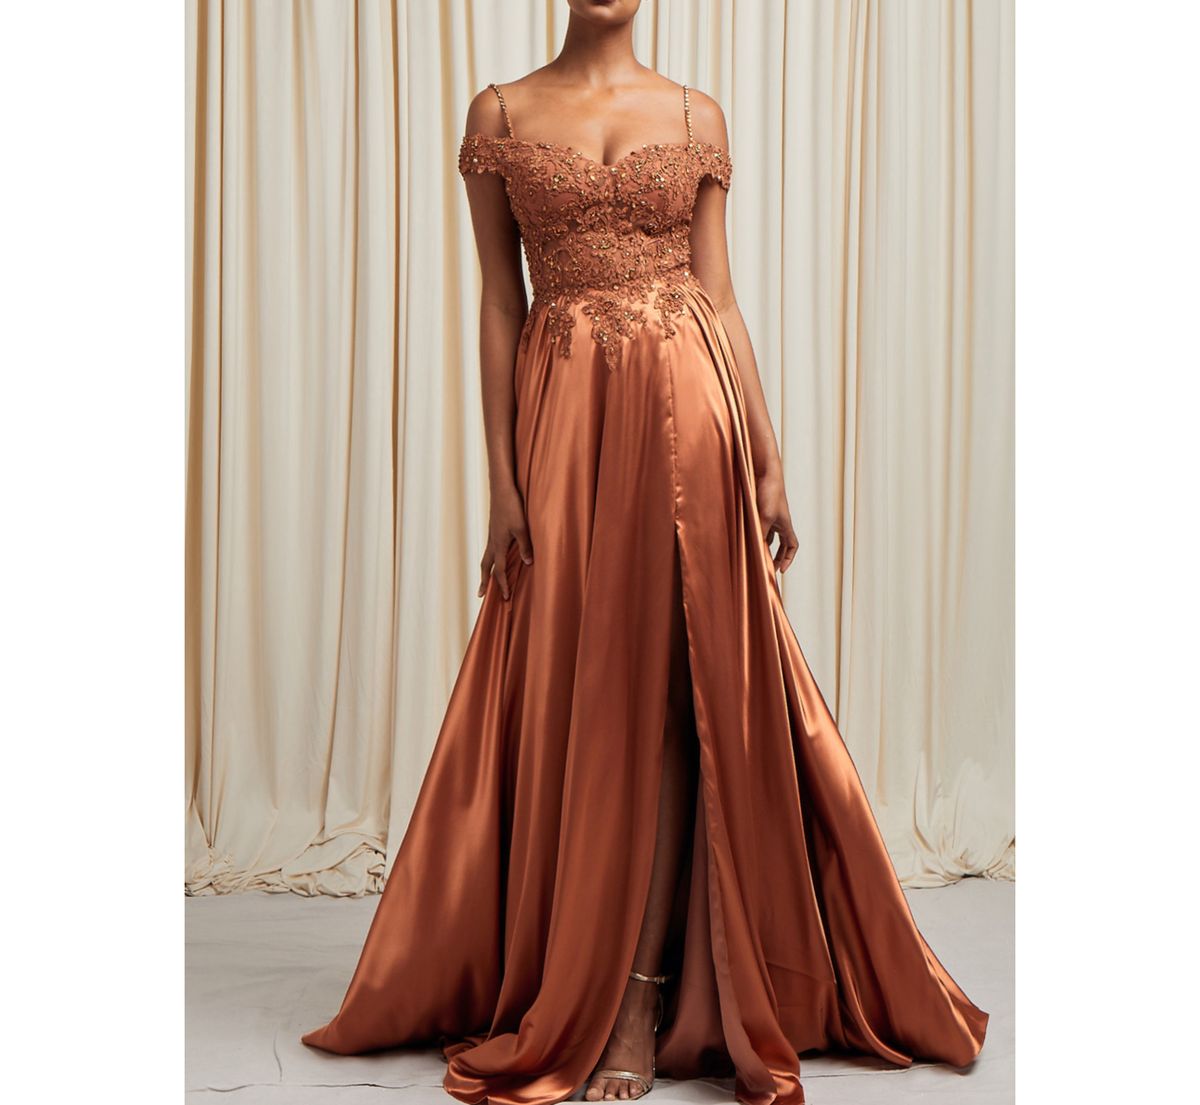 Style Burnt Orange Beaded Sweetheart Neckline Satin A-line Ball Gown Bicici & Coty  Size 12 Off The Shoulder Satin Orange A-line Dress on Queenly